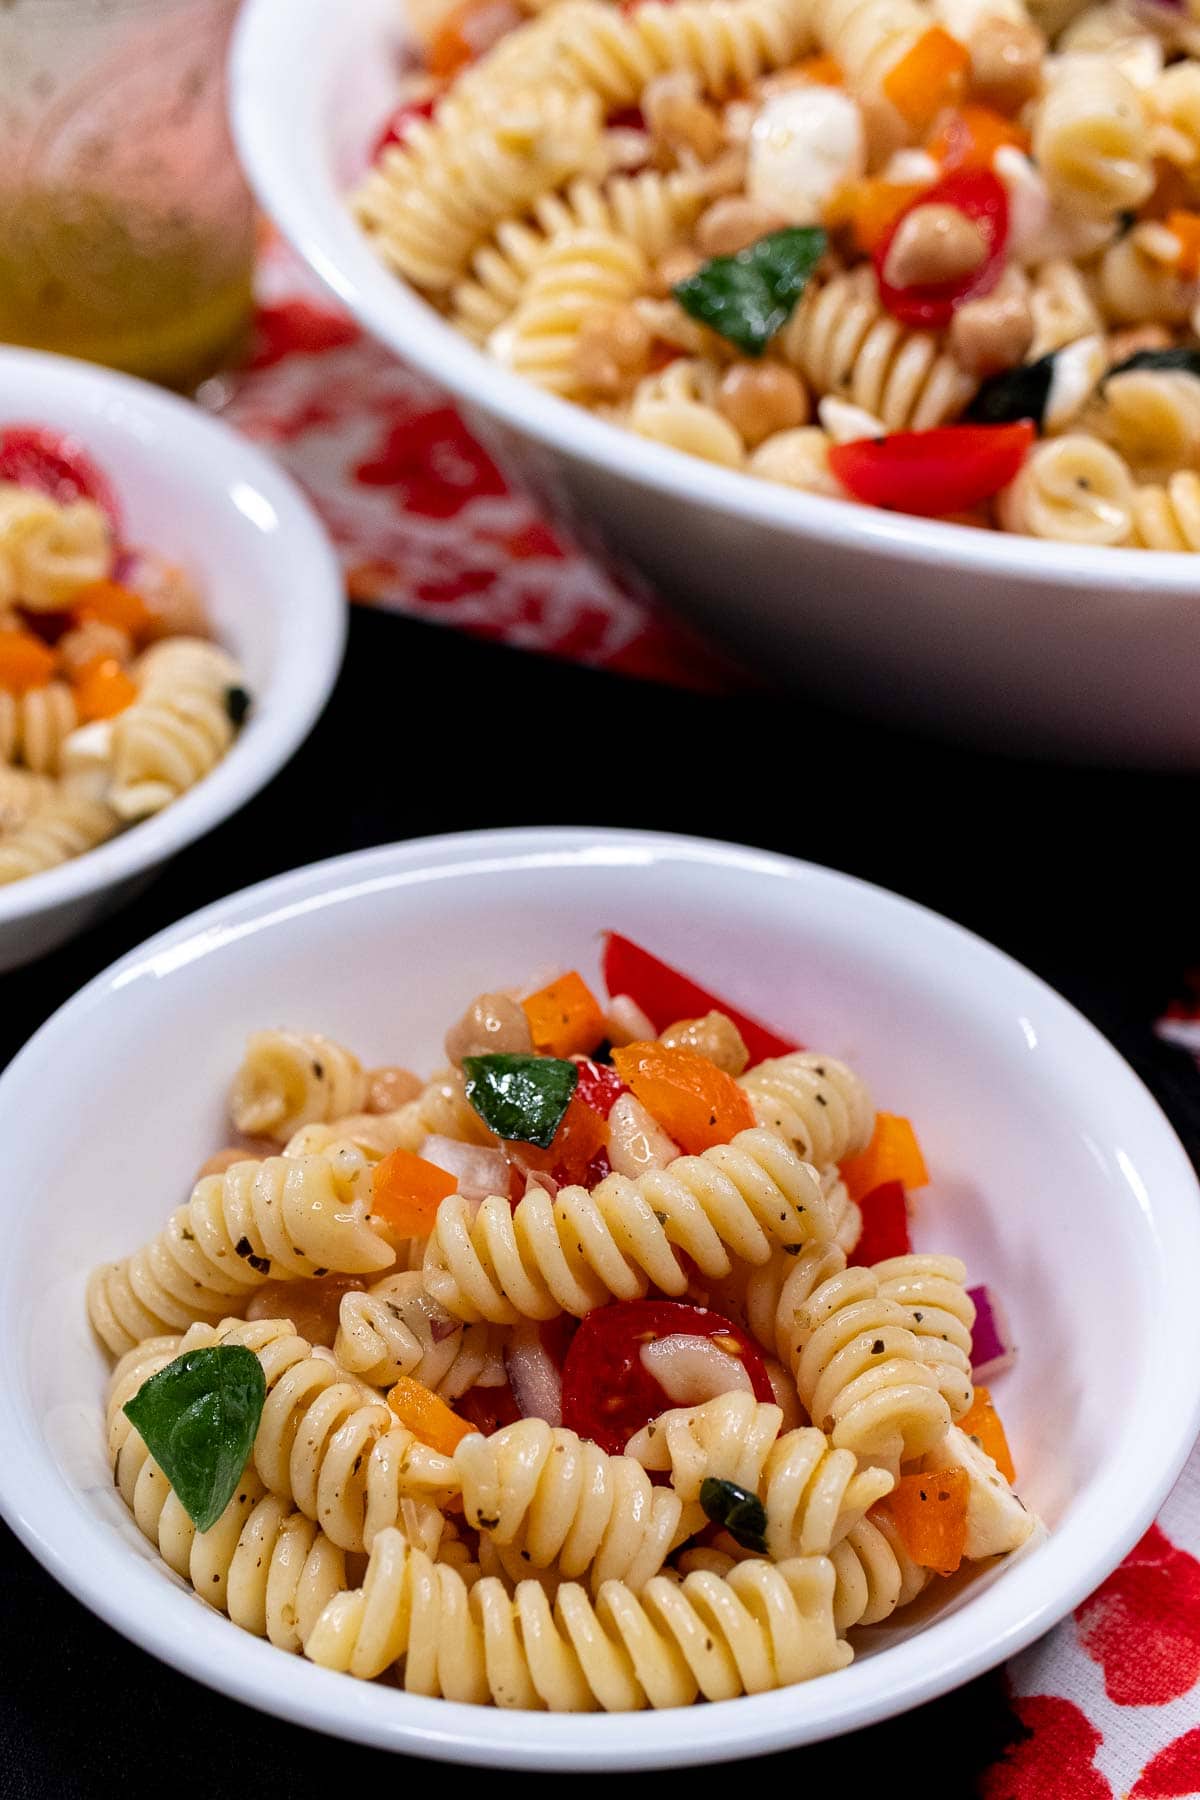 Closer view of a side bowl of pasta salad with more bowls behind it.